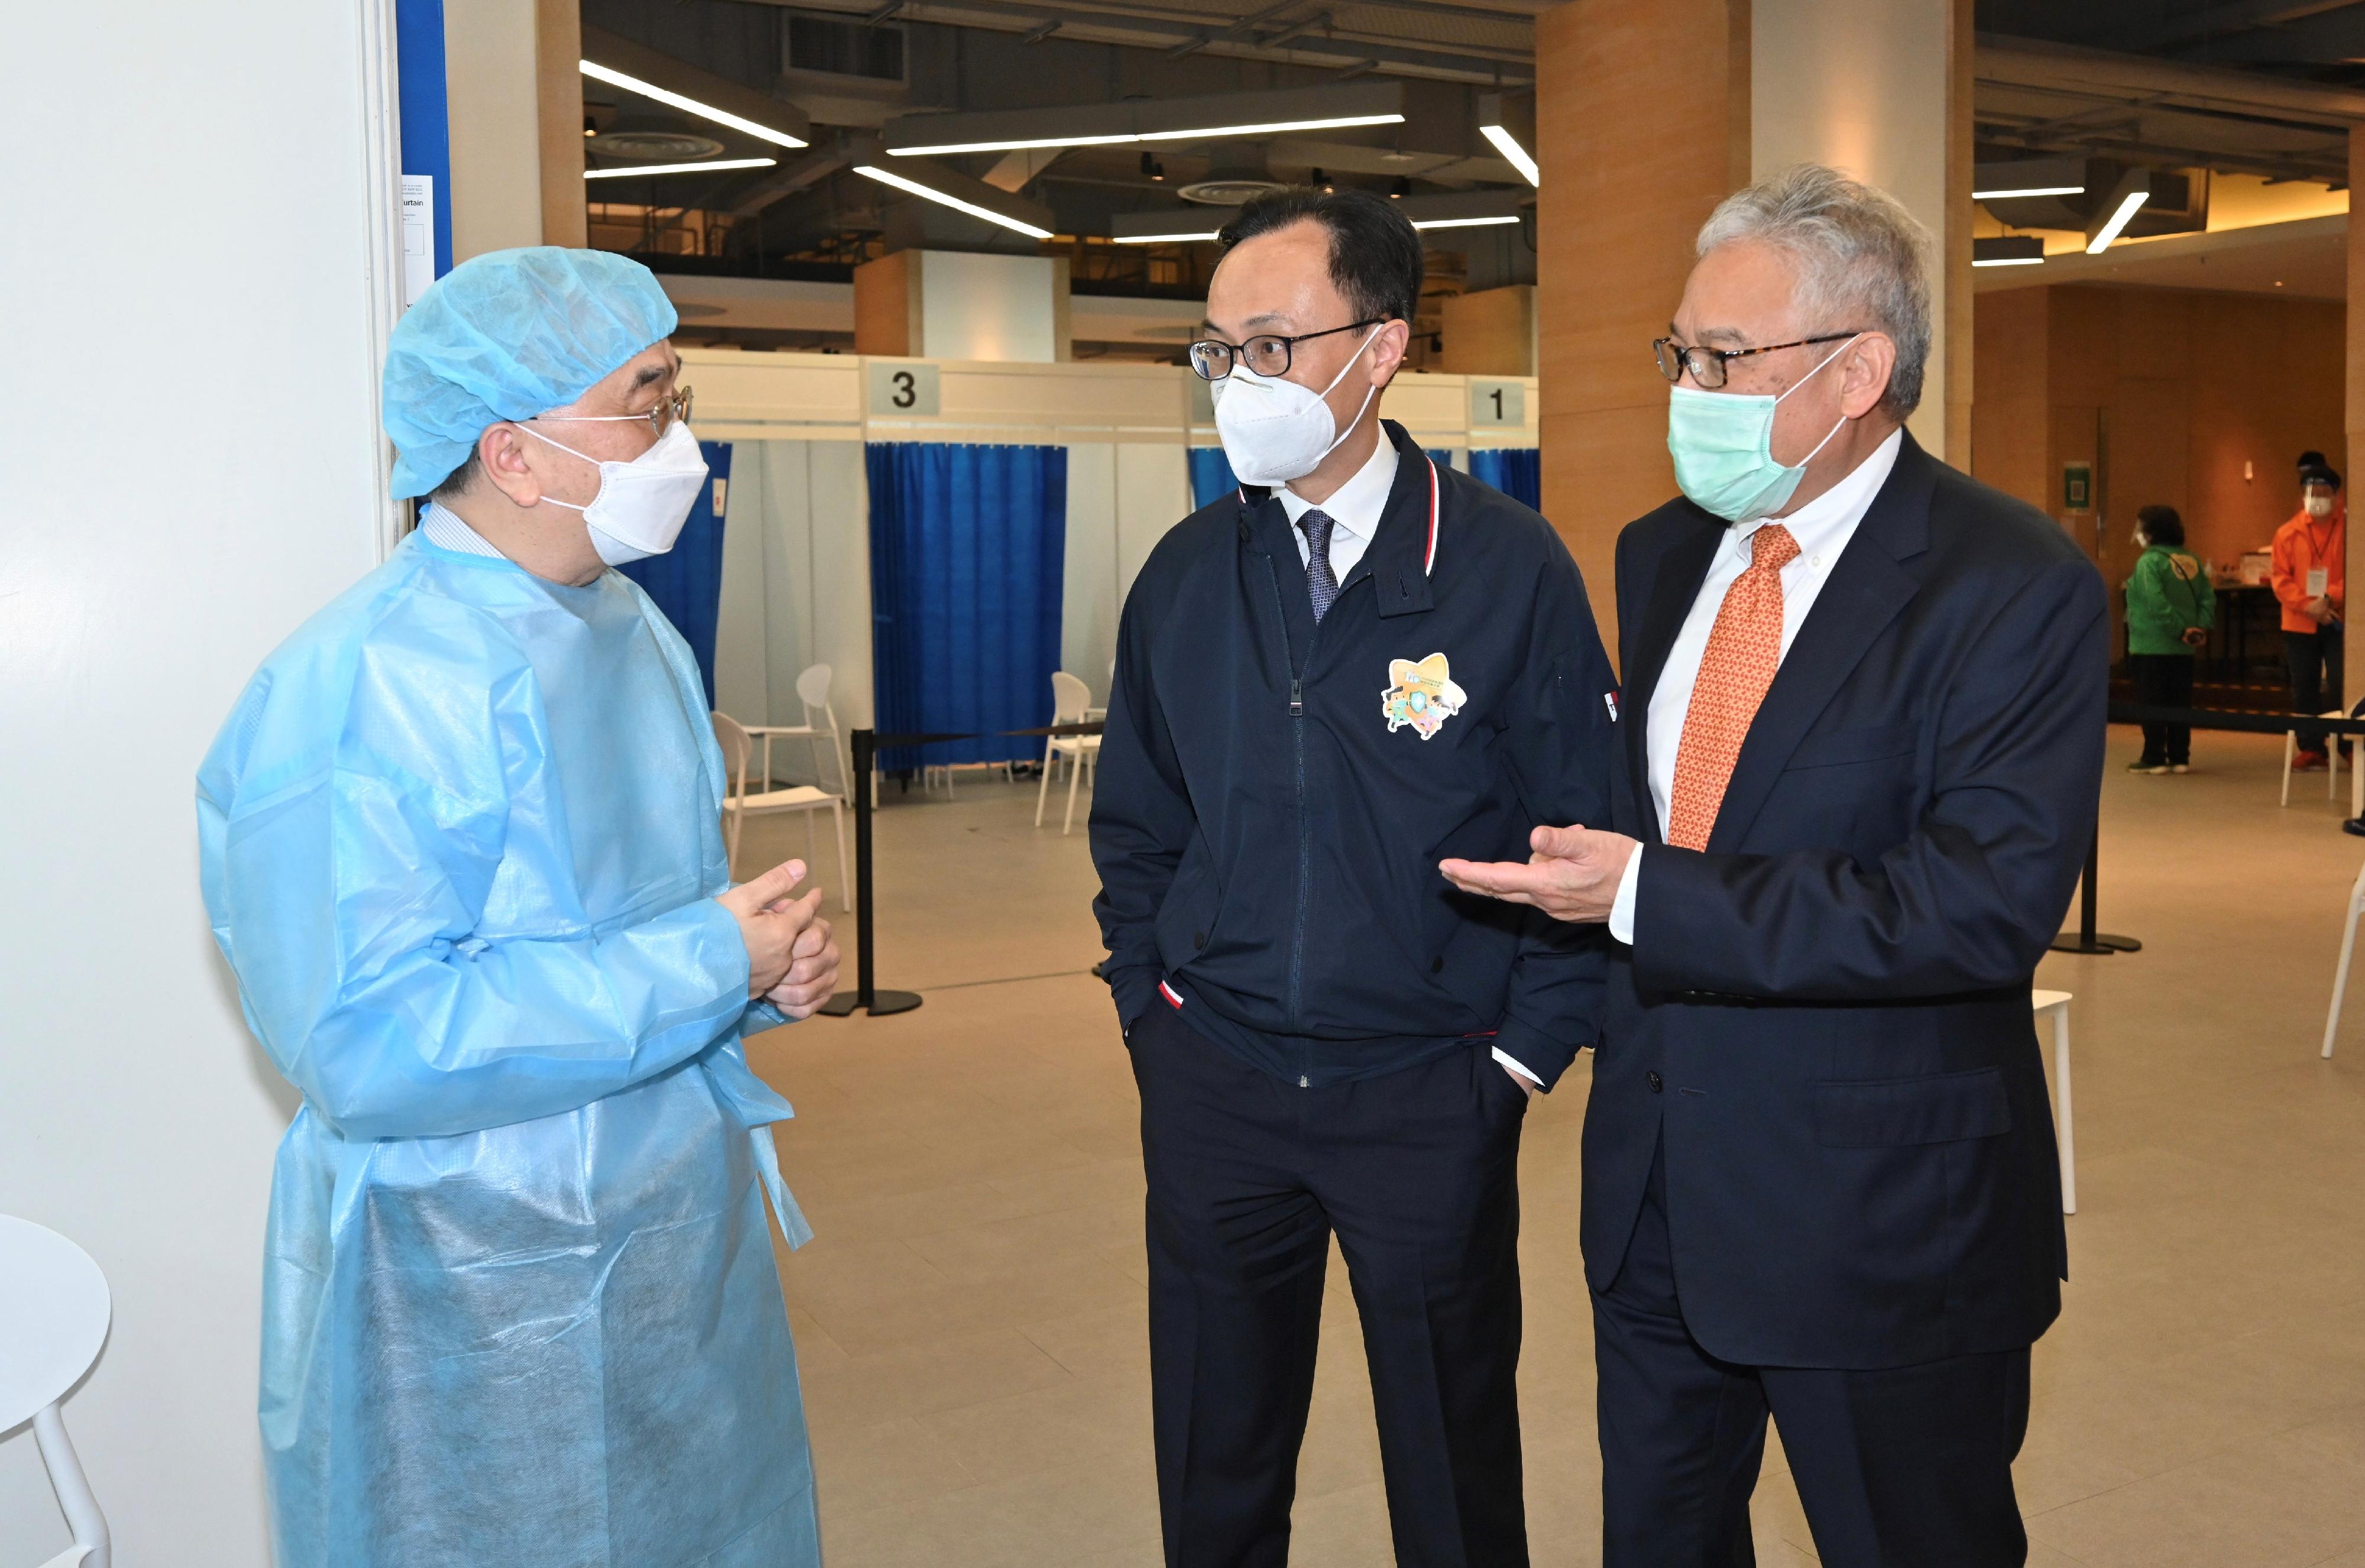 The Secretary for the Civil Service, Mr Patrick Nip, and the Group Deputy Chairman of the Fung Group, Dr William Fung, today (March 11) jointly inspected the operation of the Hong Kong Spinners Industrial Building Community Vaccination Centre (CVC). Photo shows Mr Nip (centre) and Dr Fung (right) chatting with a medical staff member of the CVC.